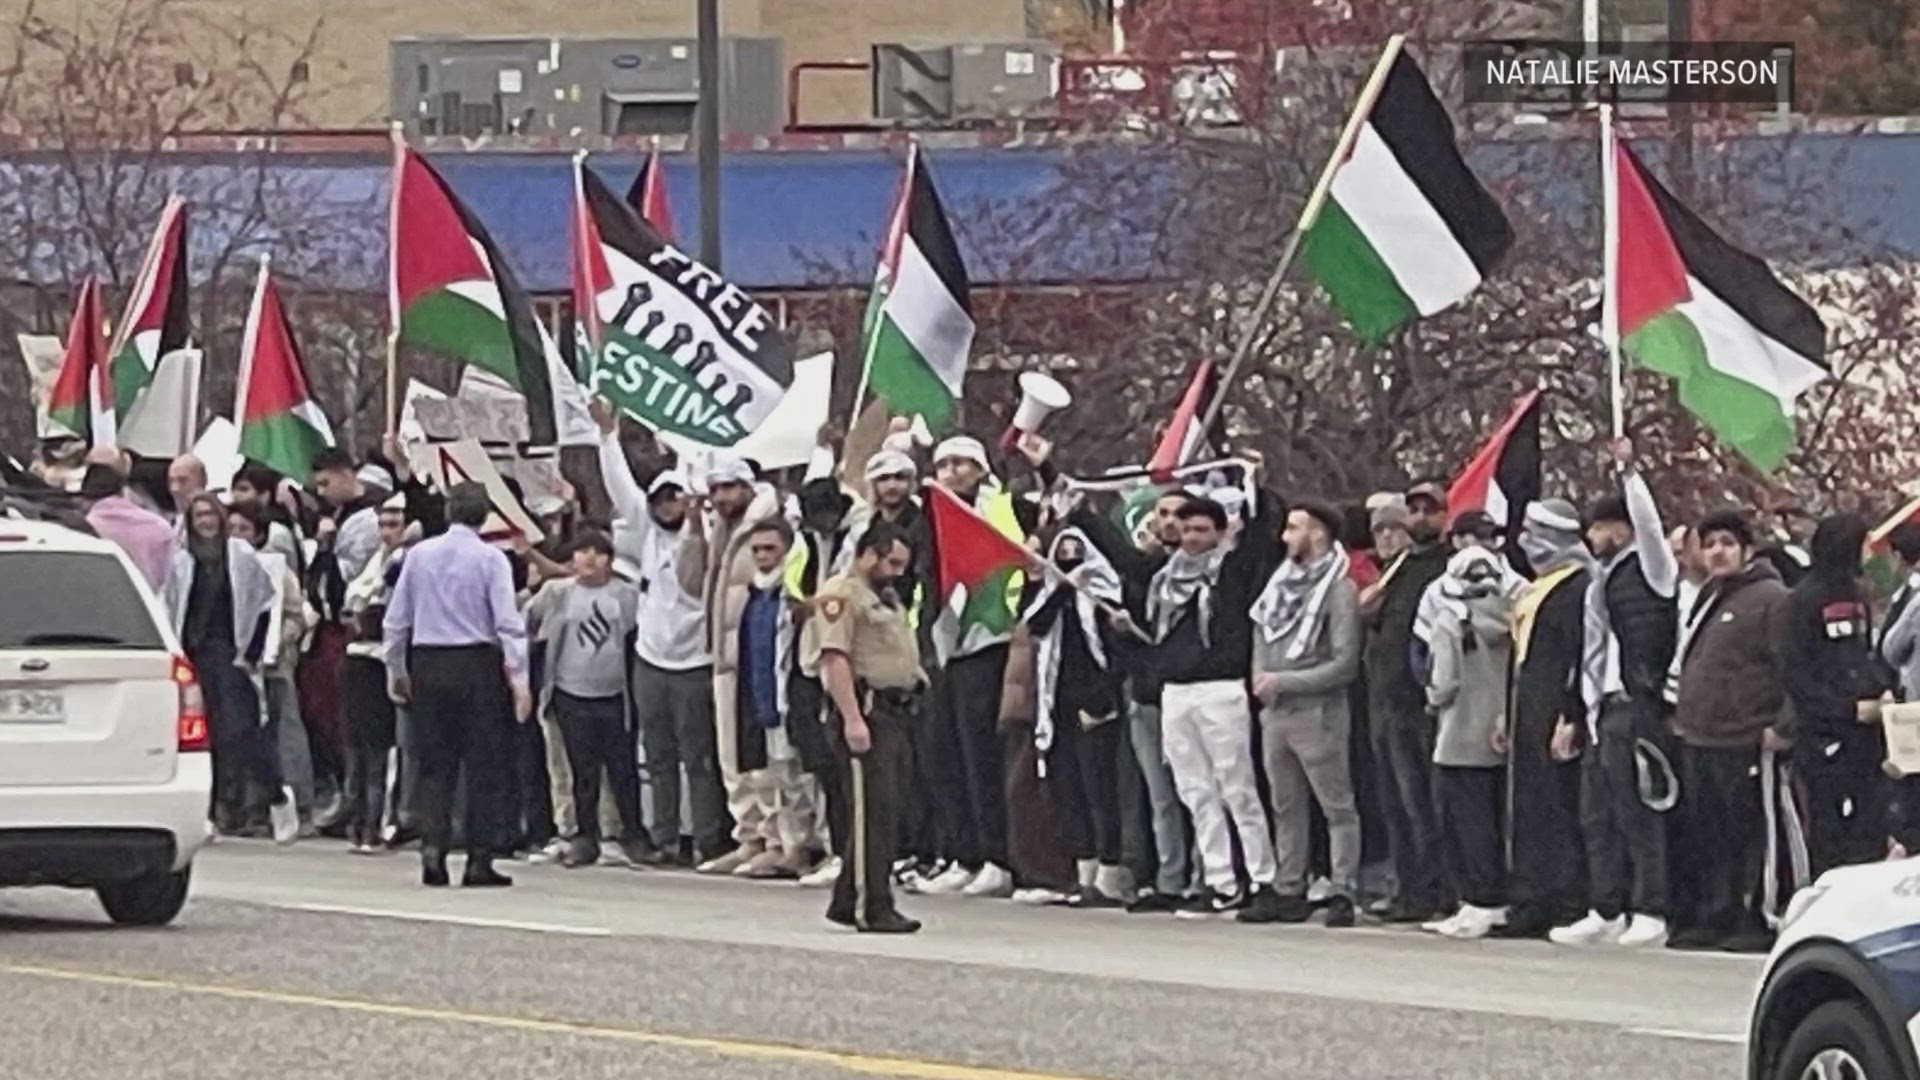 Protesters calling for a ceasefire in Gaza were in west St. Louis County. Police said one person was taken into custody following a dispute. There were no injuries.